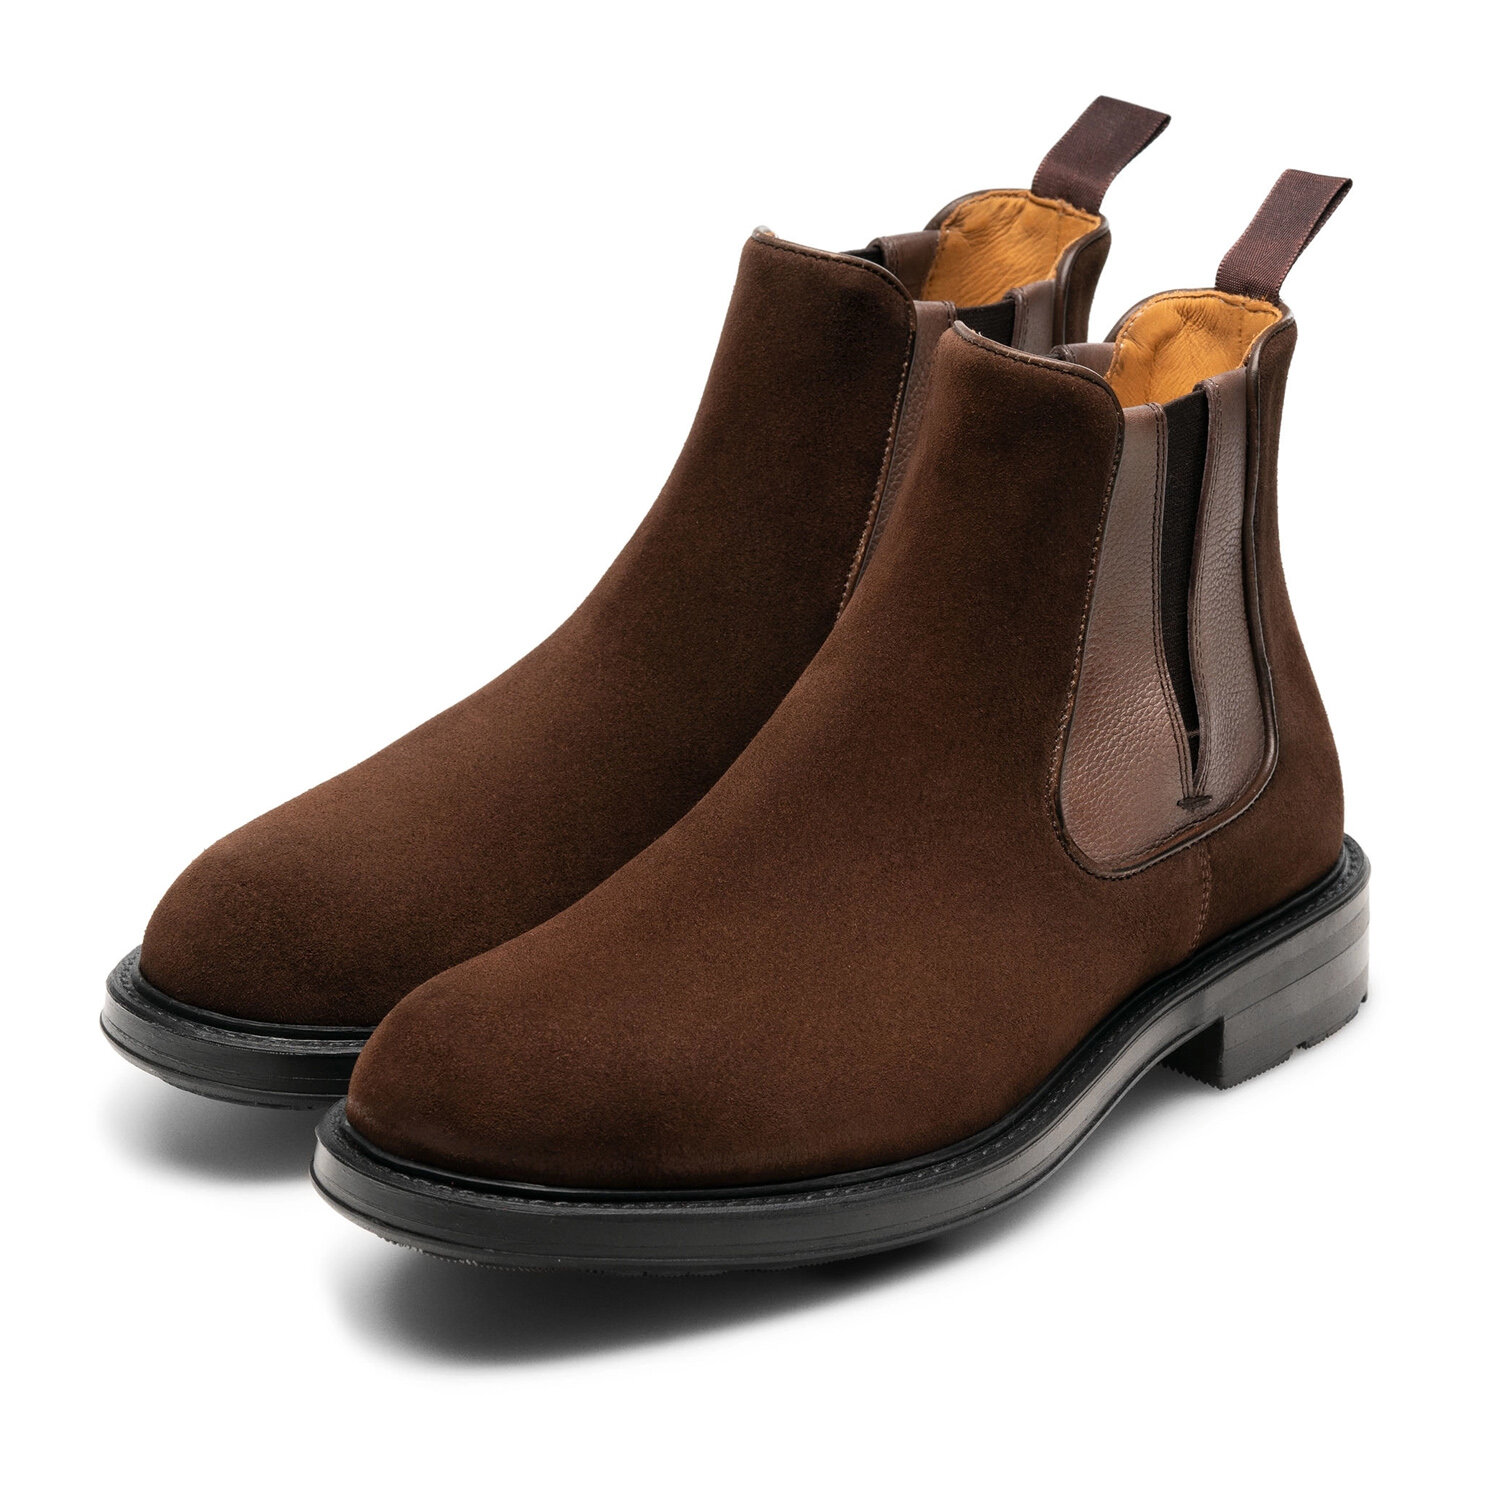 Magnanni Lugo Boot in Mid-Brown